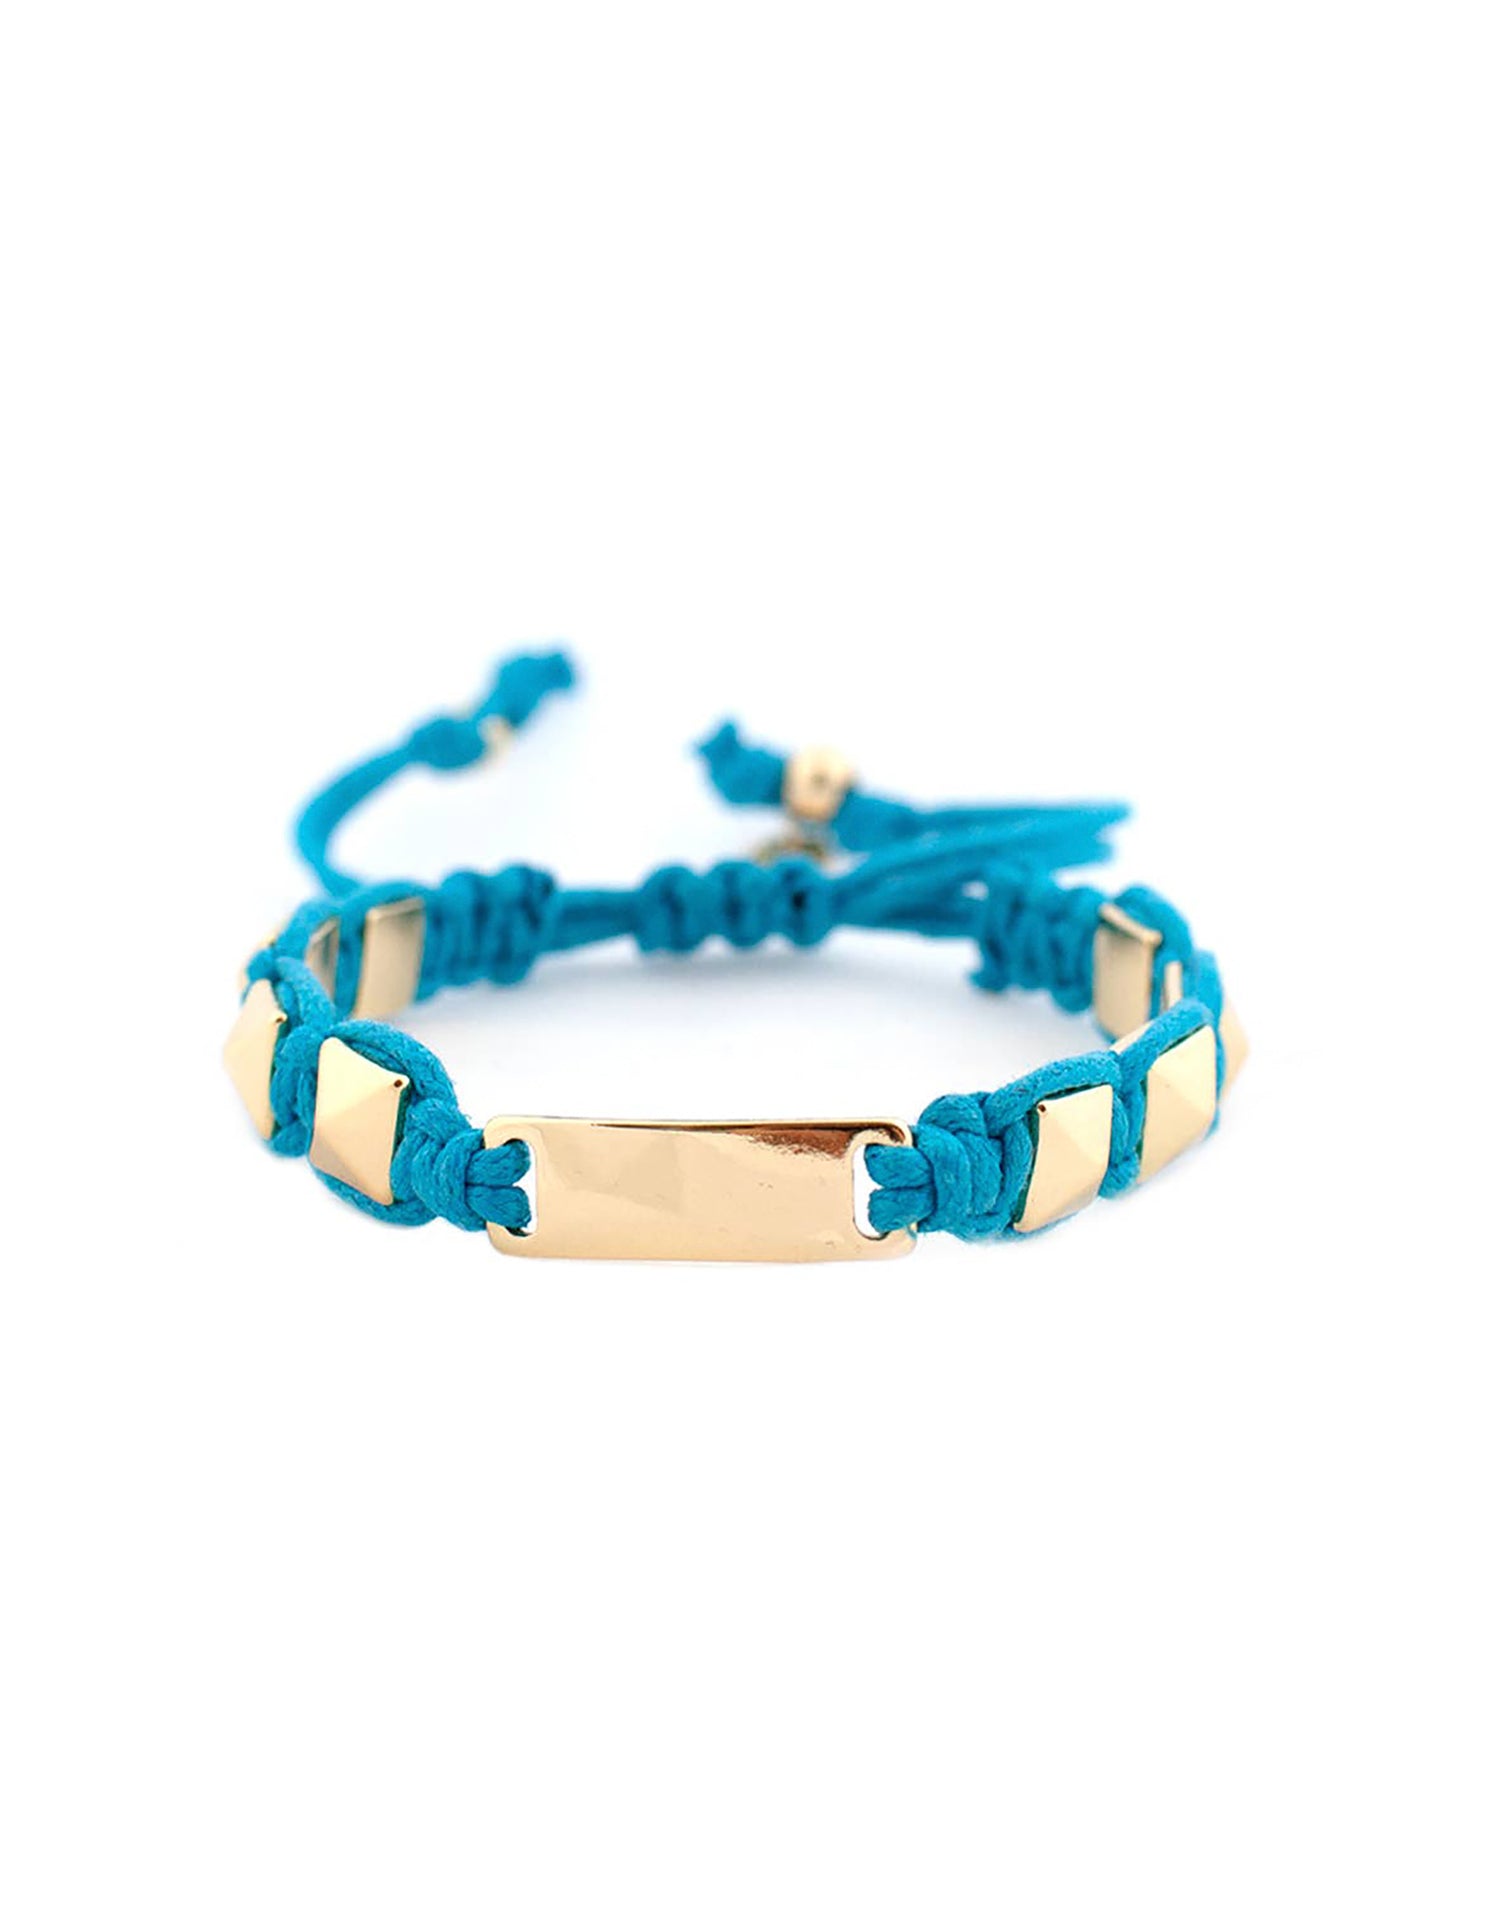 Pull Tie Bracelet by Marlyn Schiff in Gold/Turquoise - Product View